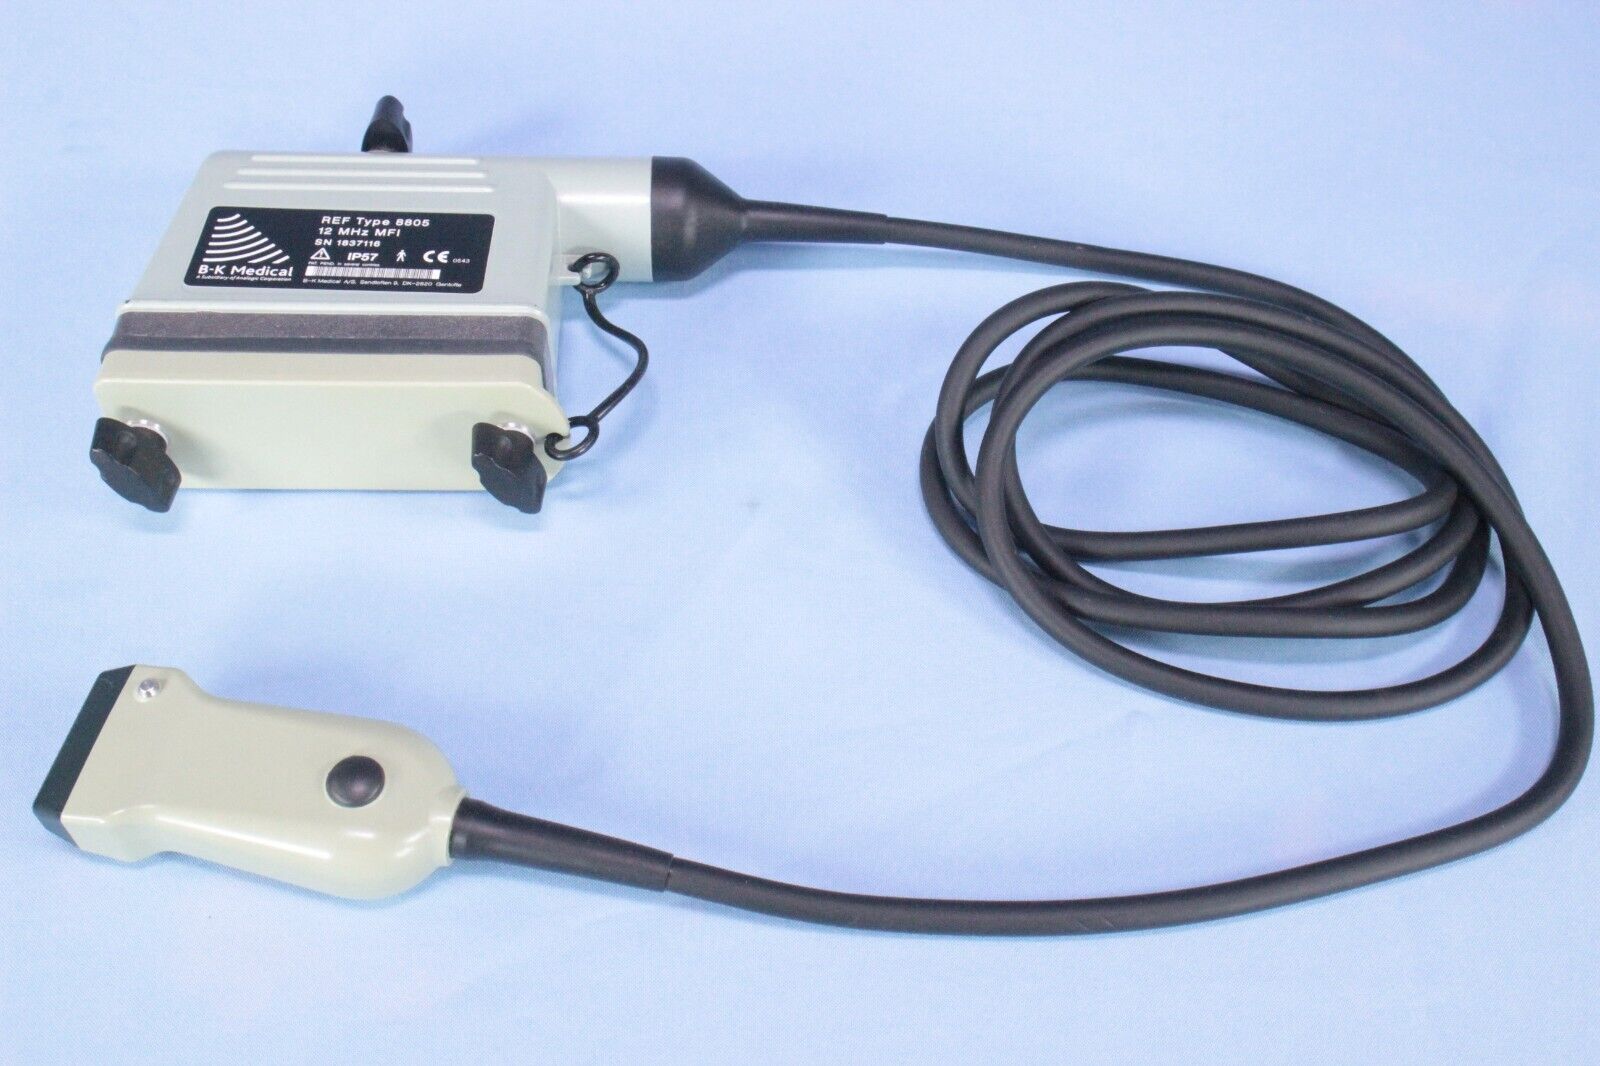 B-K 8805 Ultrasound Transducer Probe TESTED with Airscan Warranty